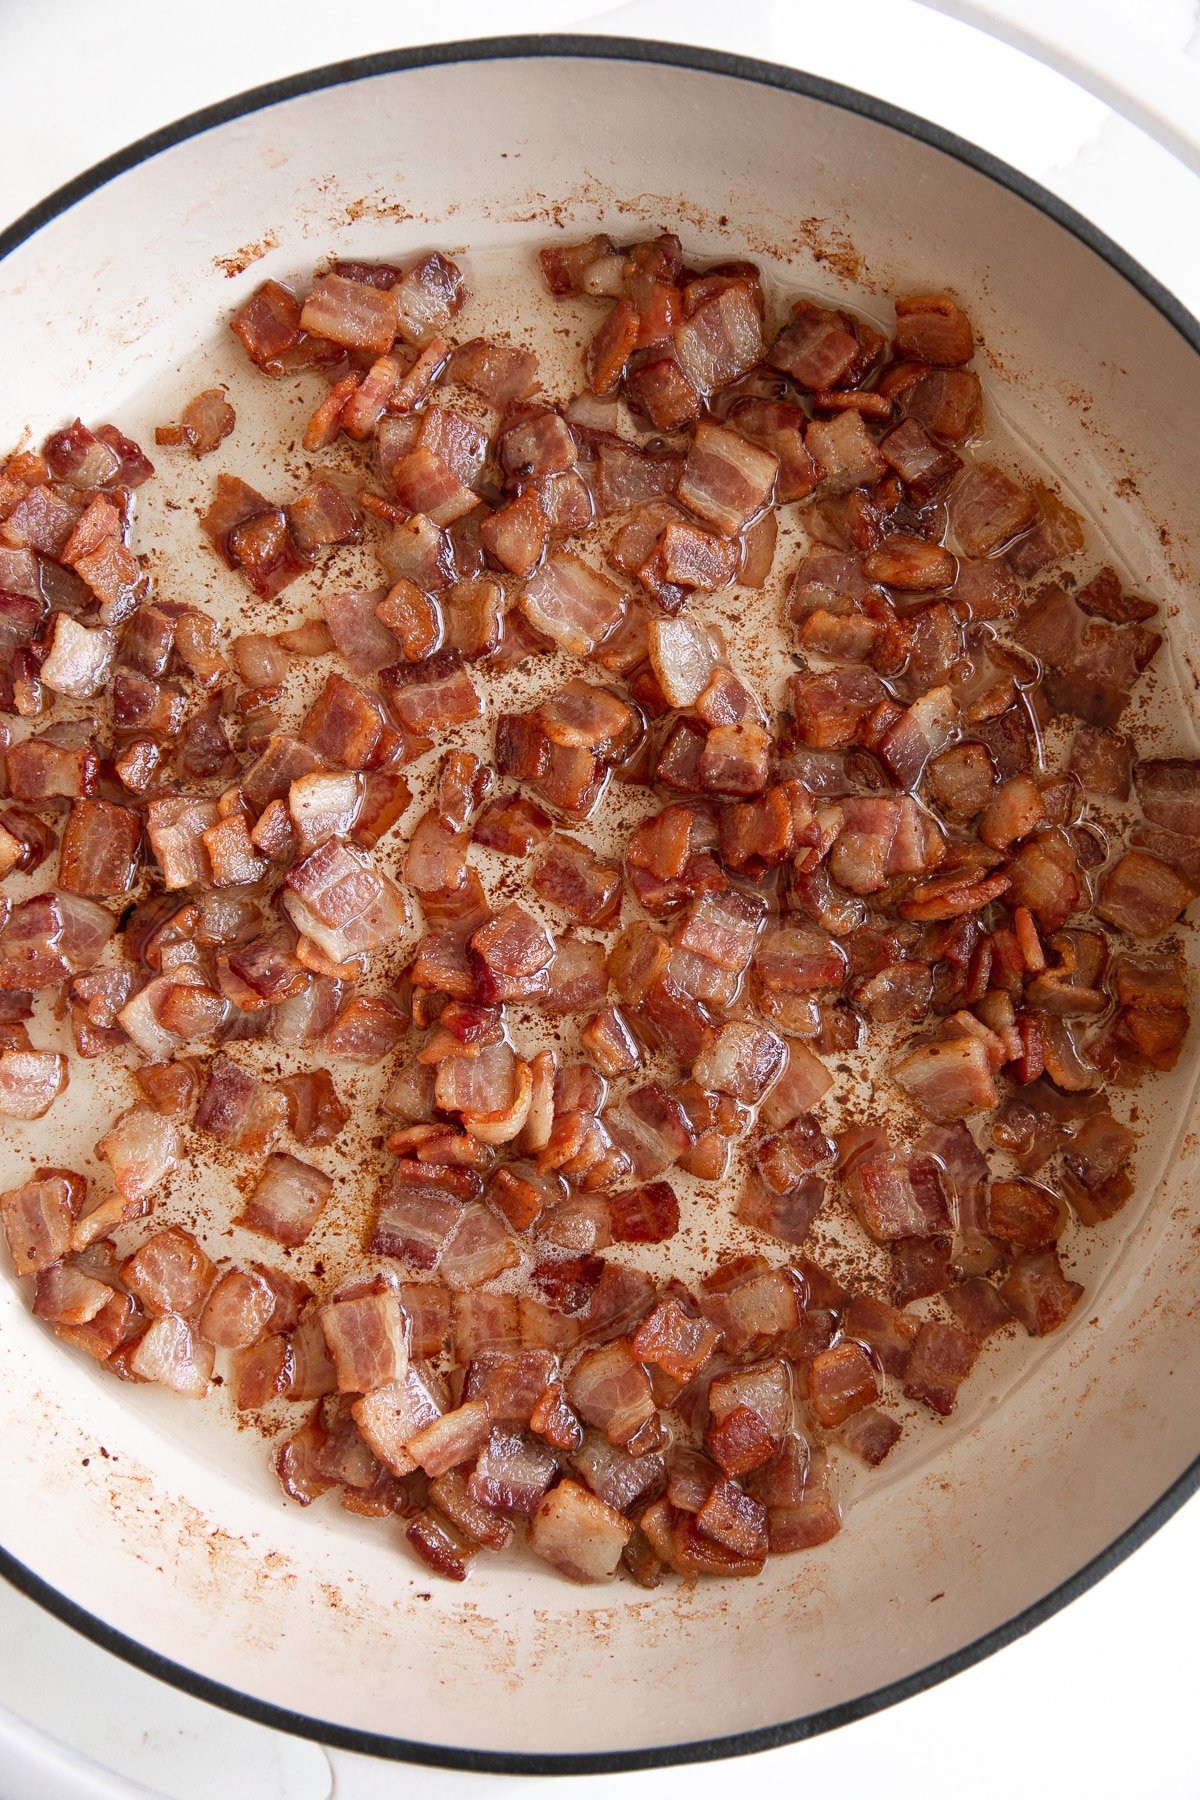 Enameled pan filled with sizzling cooked chopped bacon pieces.